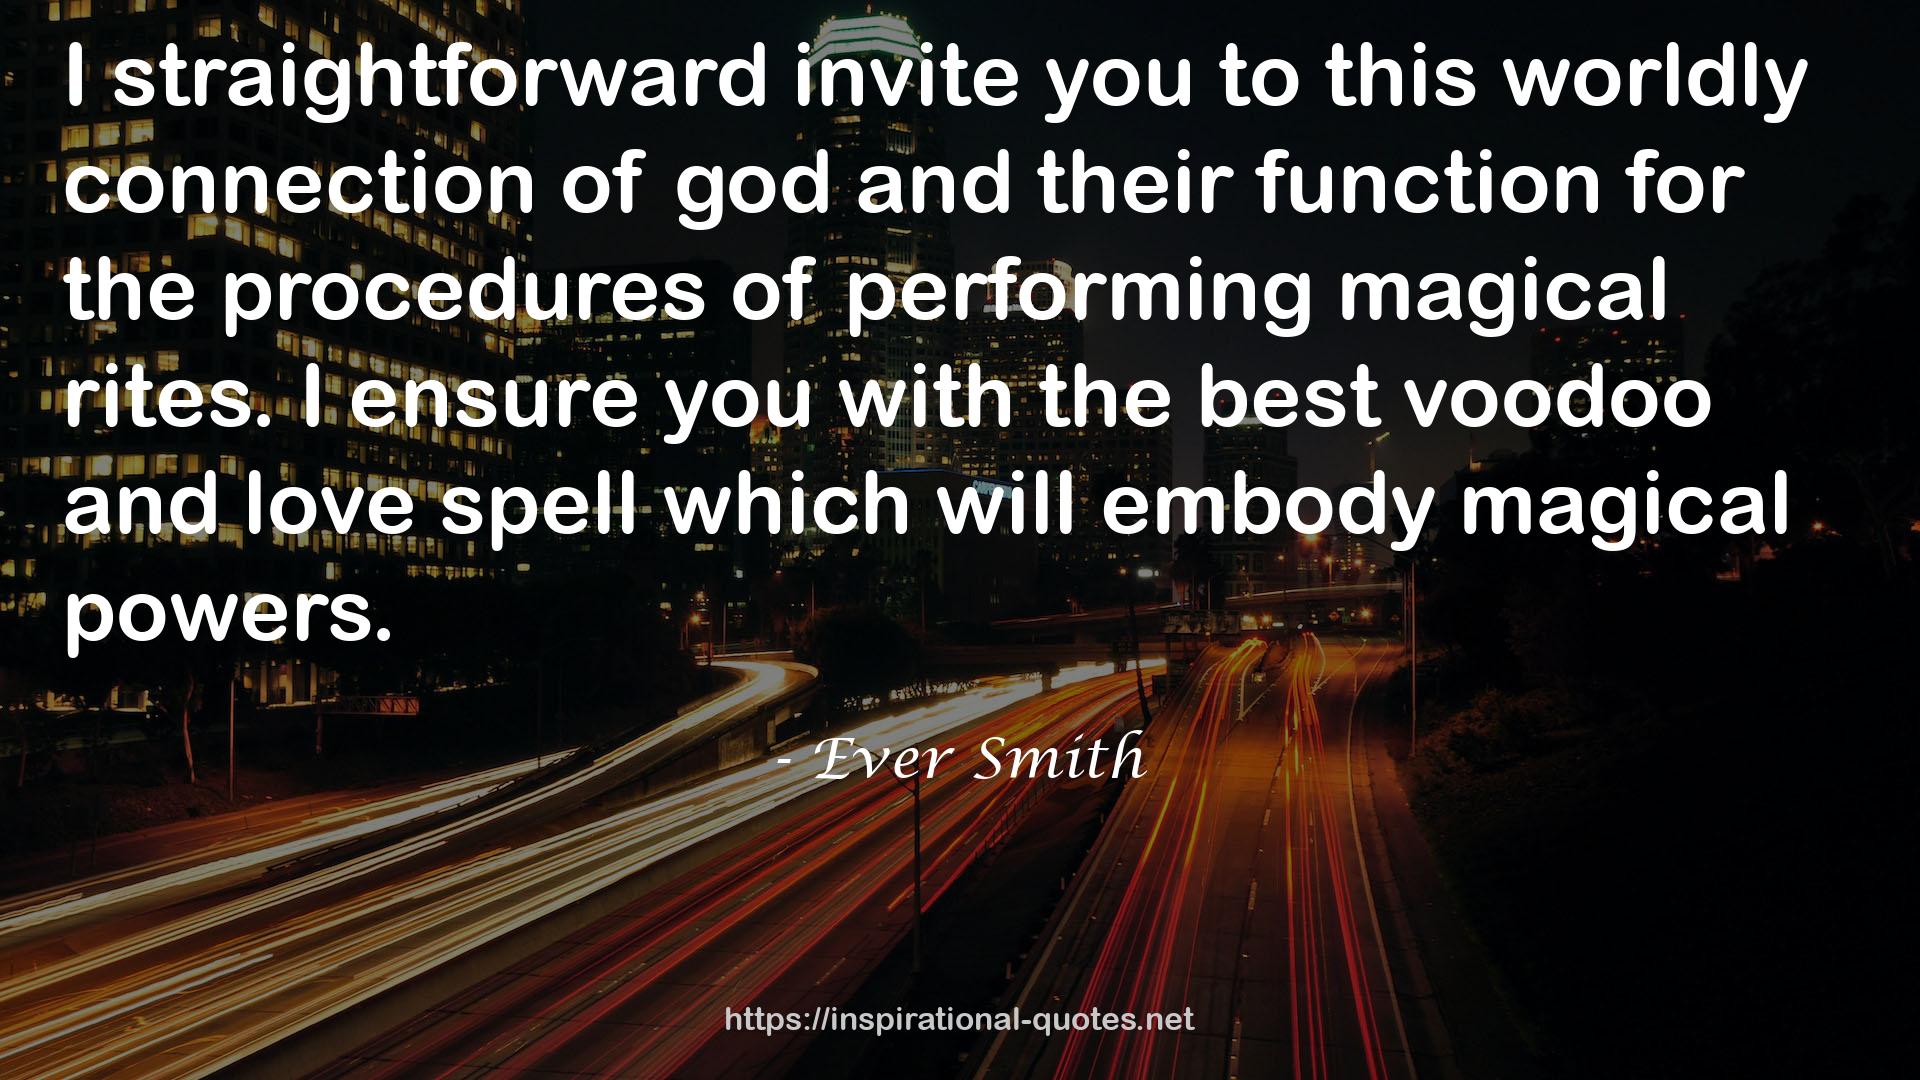 Ever Smith QUOTES